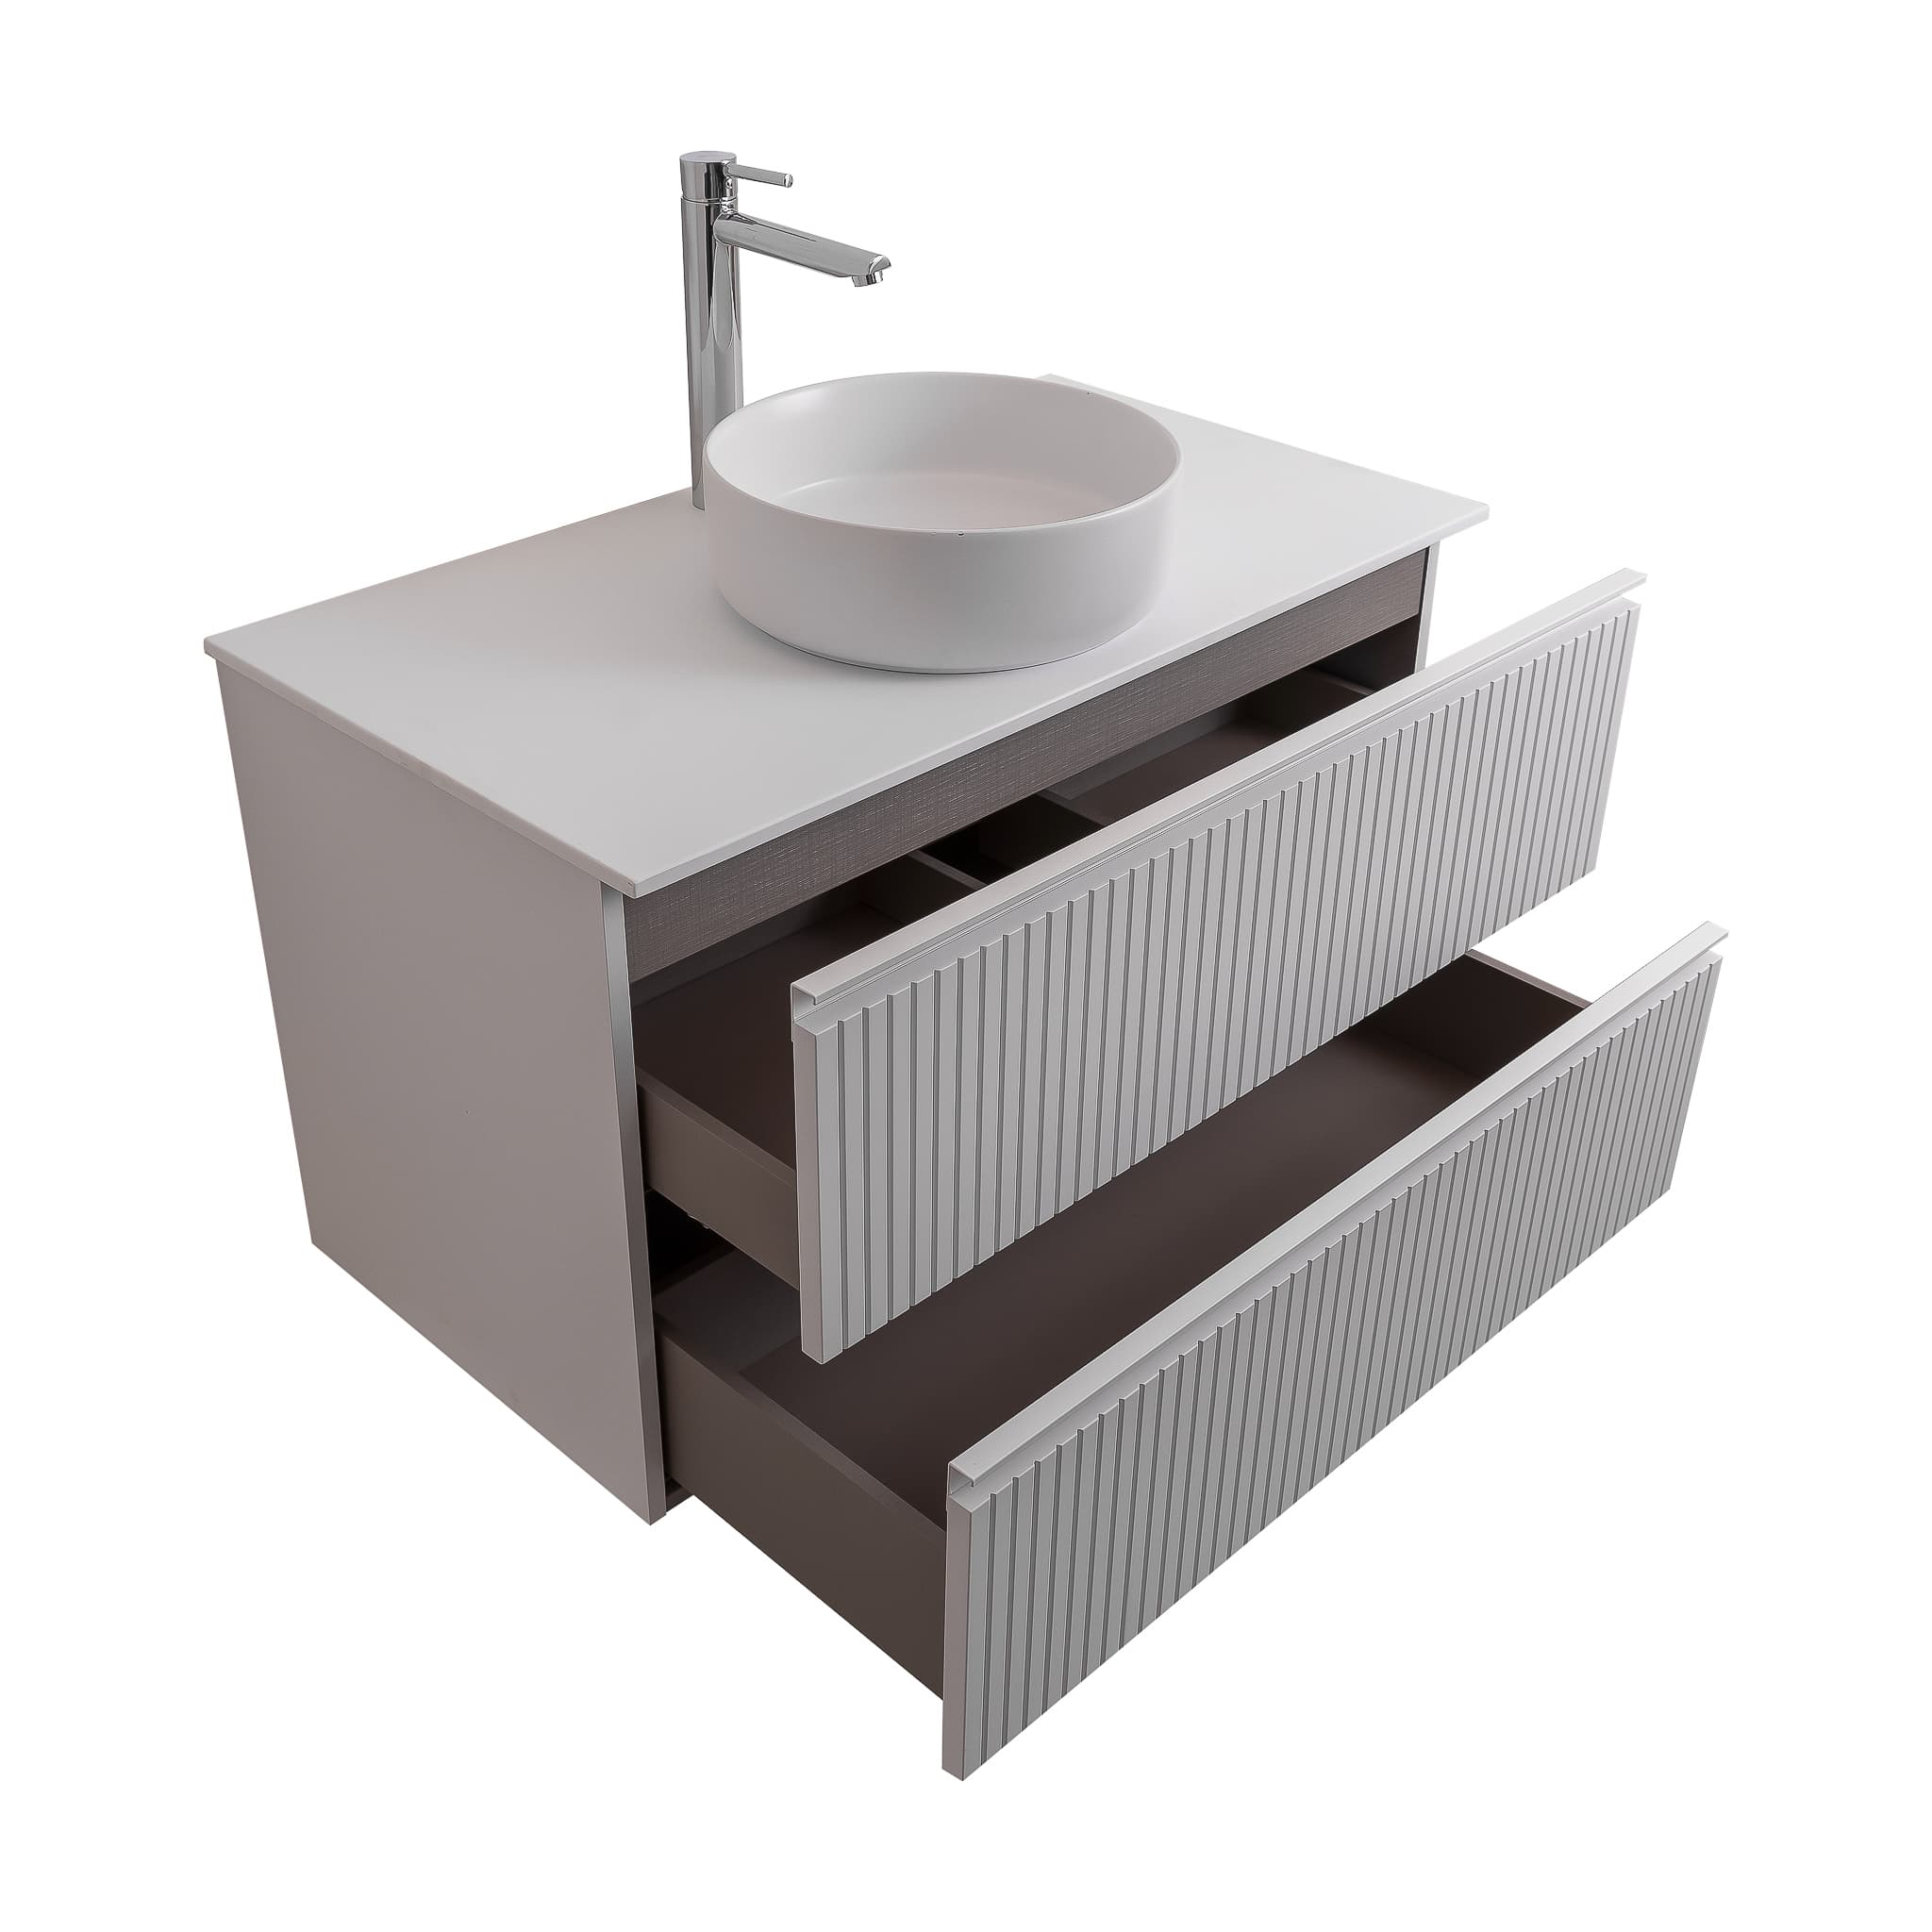 Ares 39.5 Matte White Cabinet, Ares White Top And Ares White Ceramic Basin, Wall Mounted Modern Vanity Set